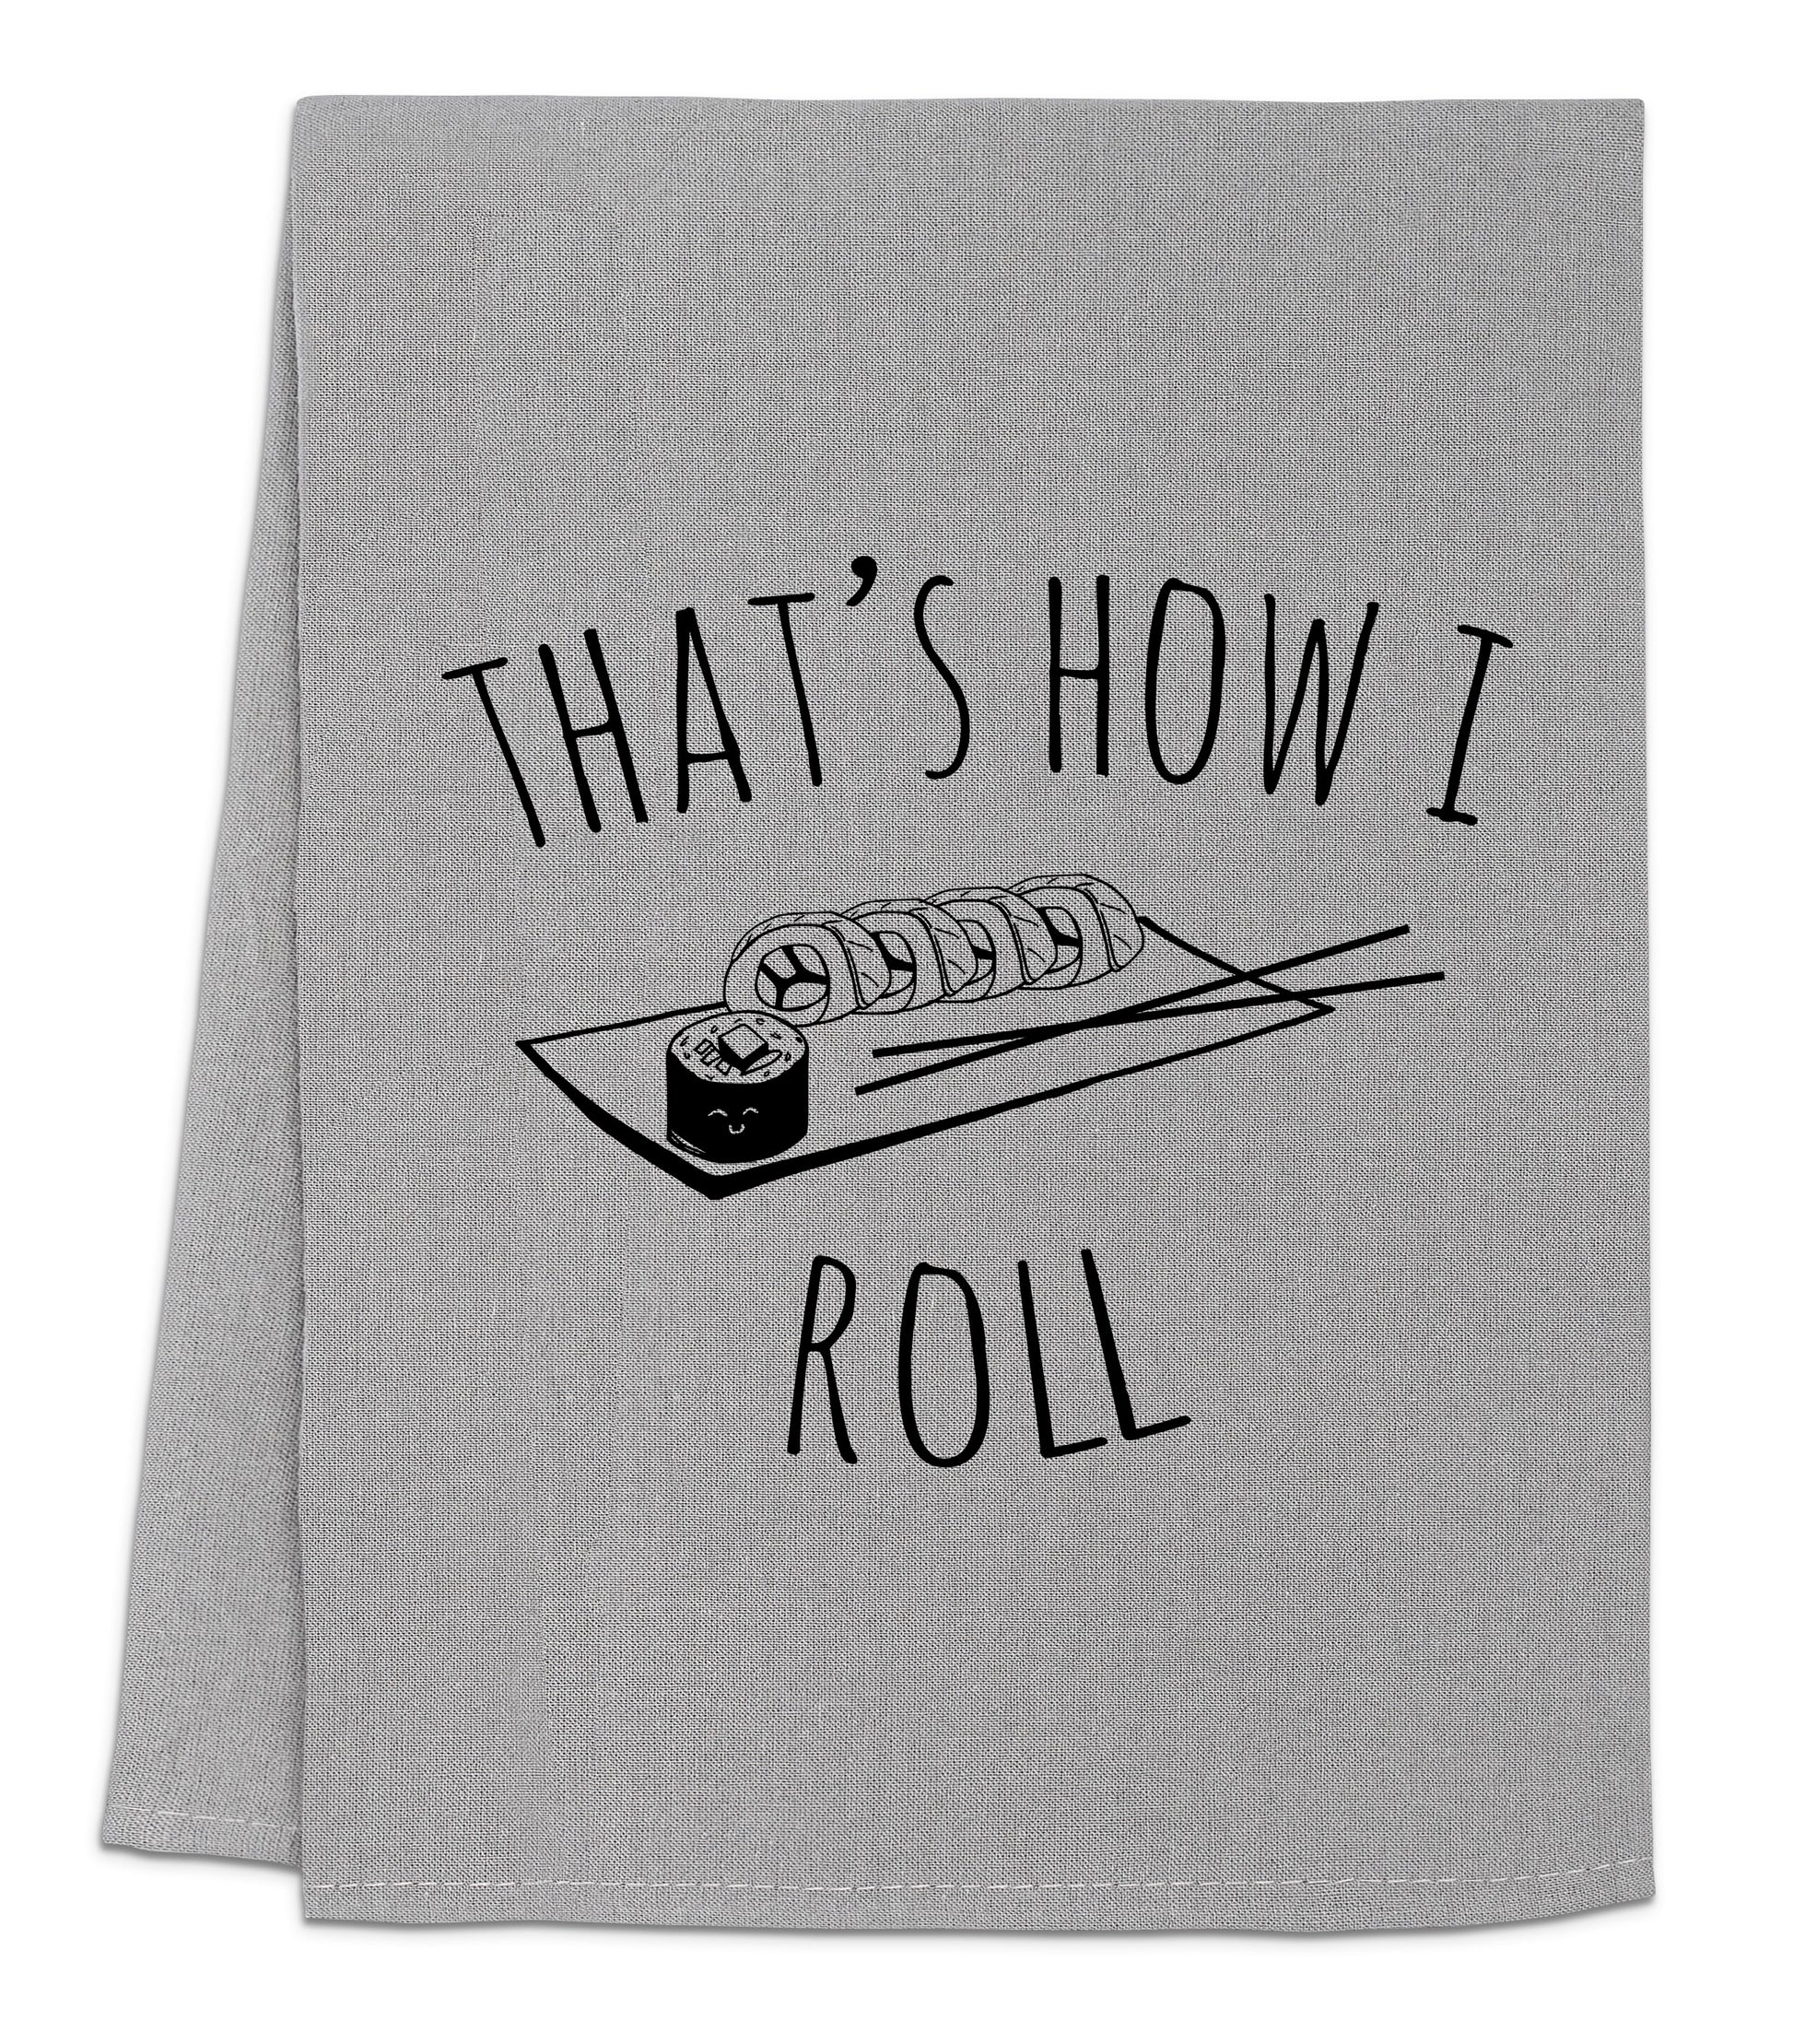 a towel that says that's how i roll on it